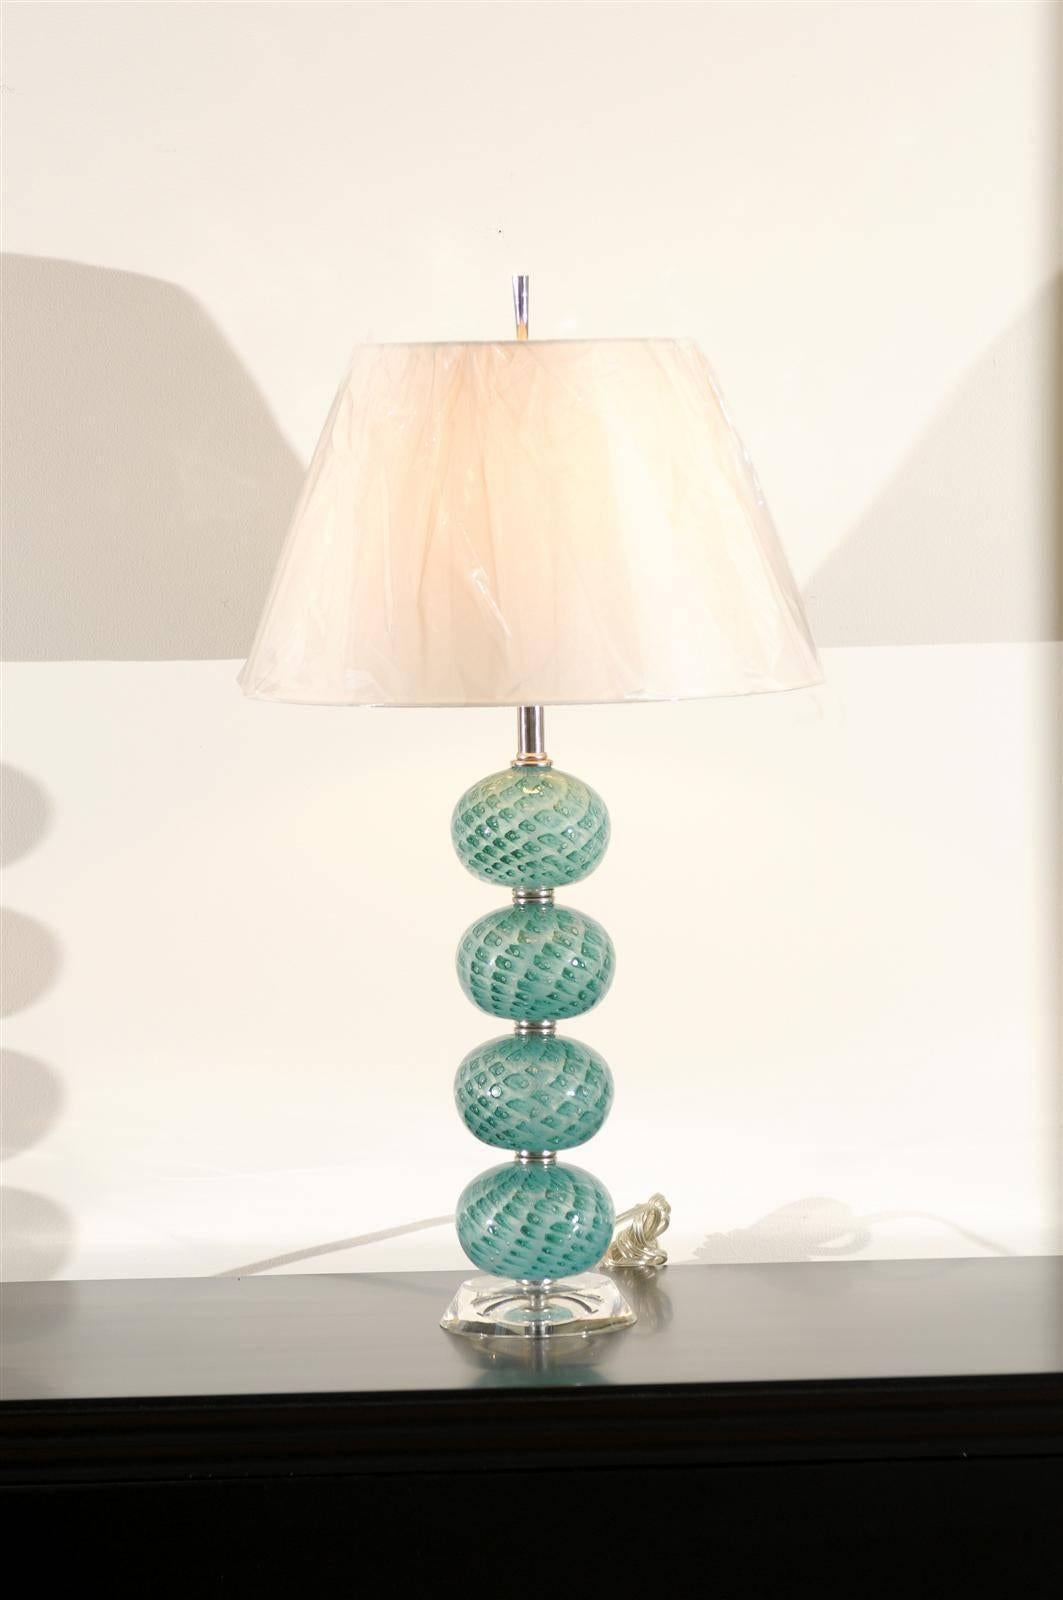 Outstanding Pair of Vintage Stacked Blown Glass Ball Murano Lamps In Excellent Condition For Sale In Atlanta, GA